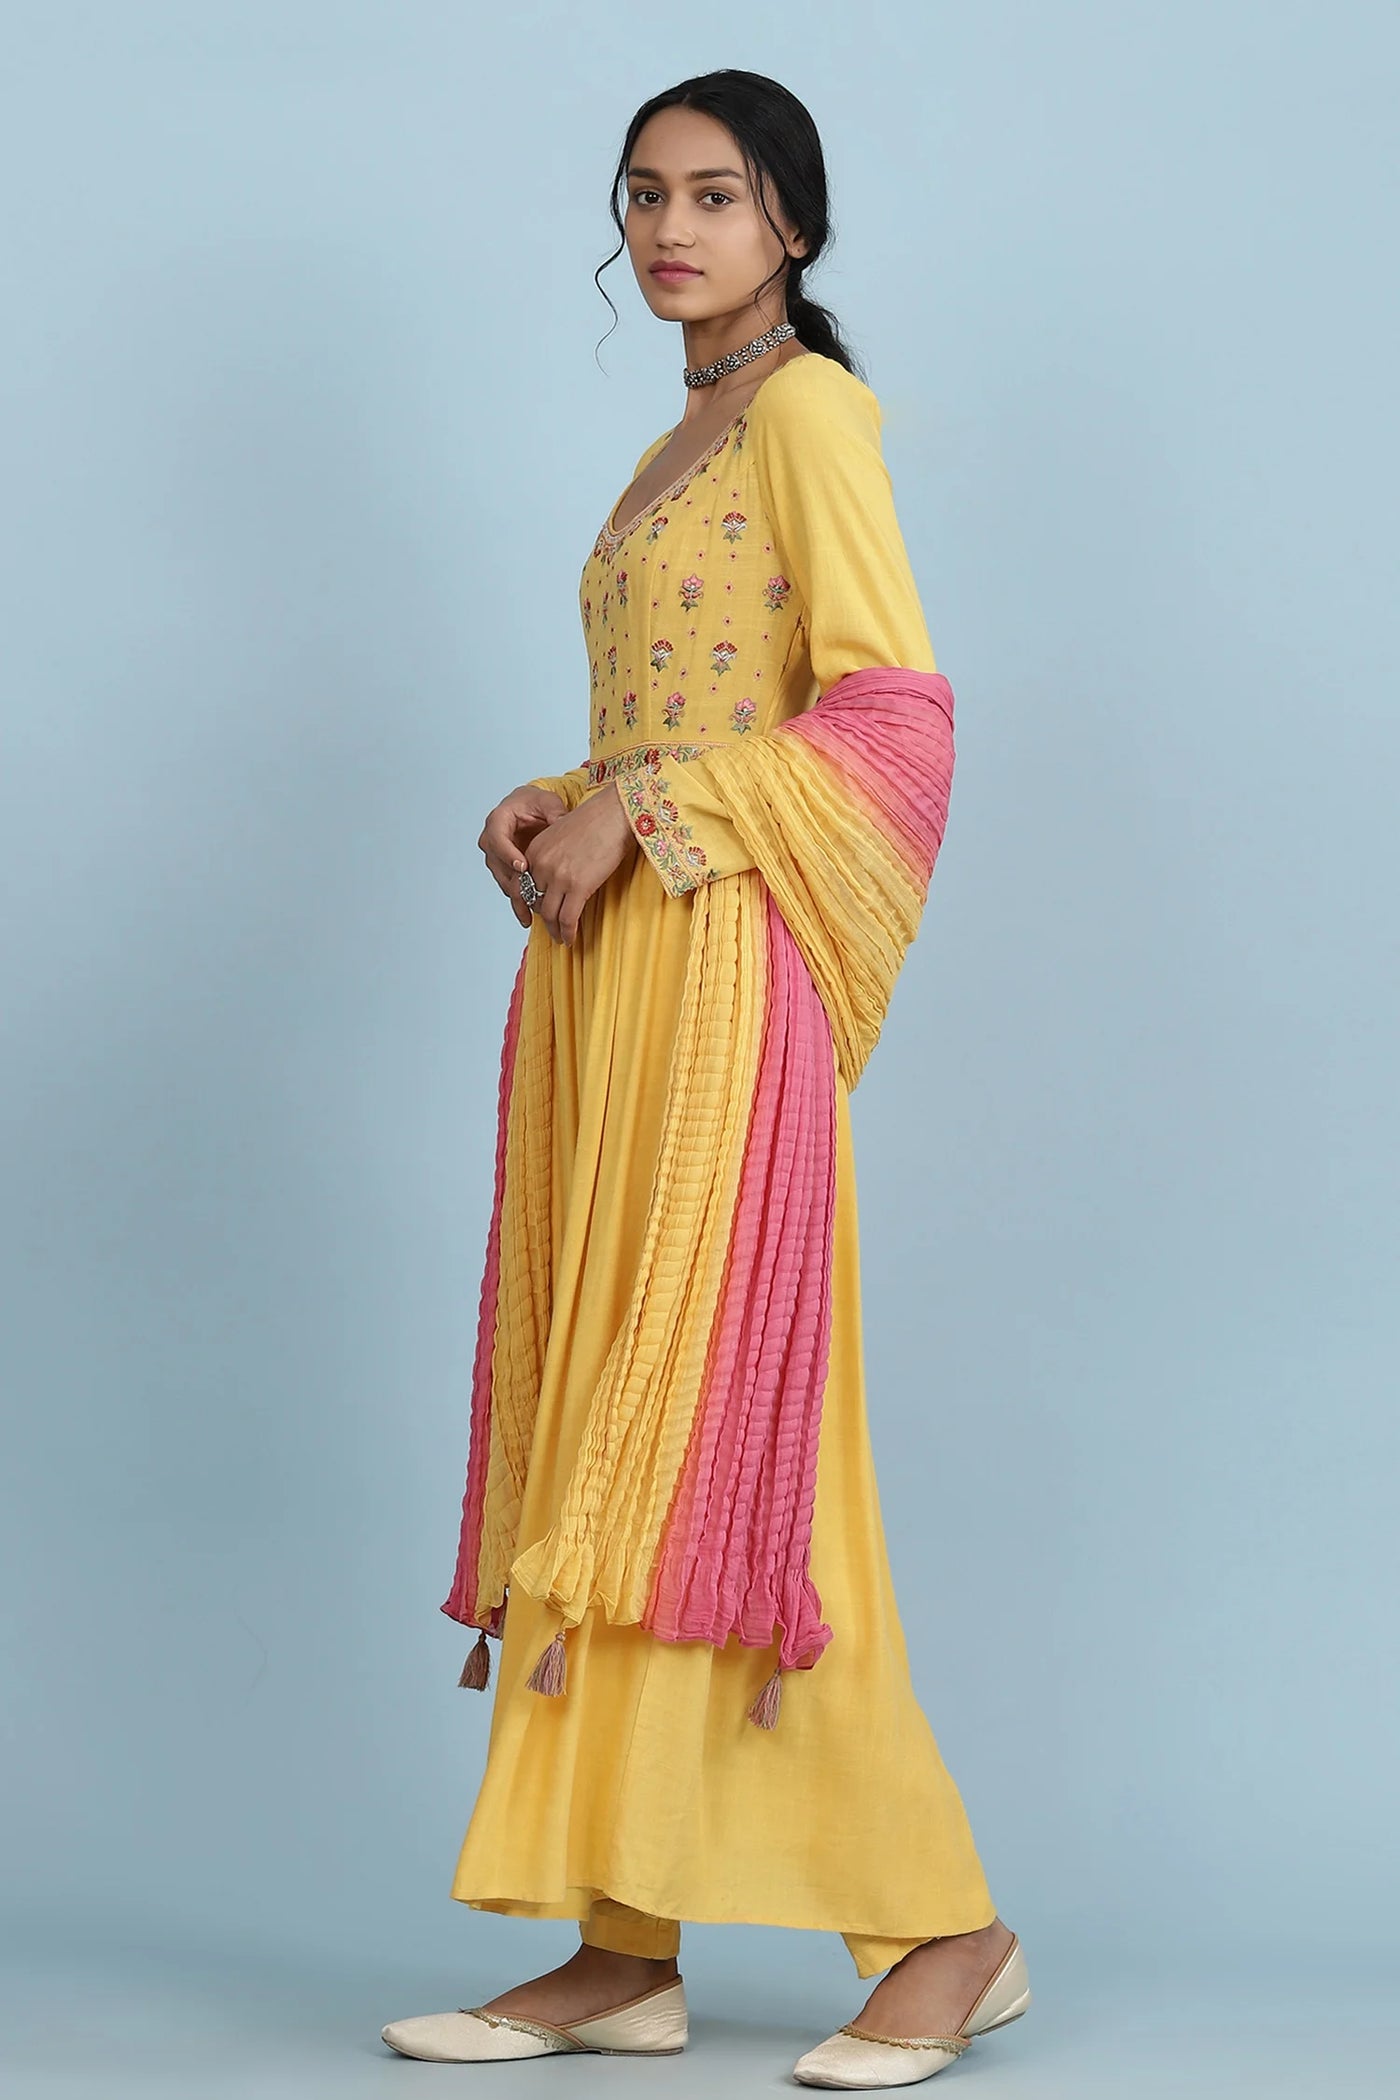 Yellow Slub Anarkali Set Indian Clothing in Denver, CO, Aurora, CO, Boulder, CO, Fort Collins, CO, Colorado Springs, CO, Parker, CO, Highlands Ranch, CO, Cherry Creek, CO, Centennial, CO, and Longmont, CO. NATIONWIDE SHIPPING USA- India Fashion X